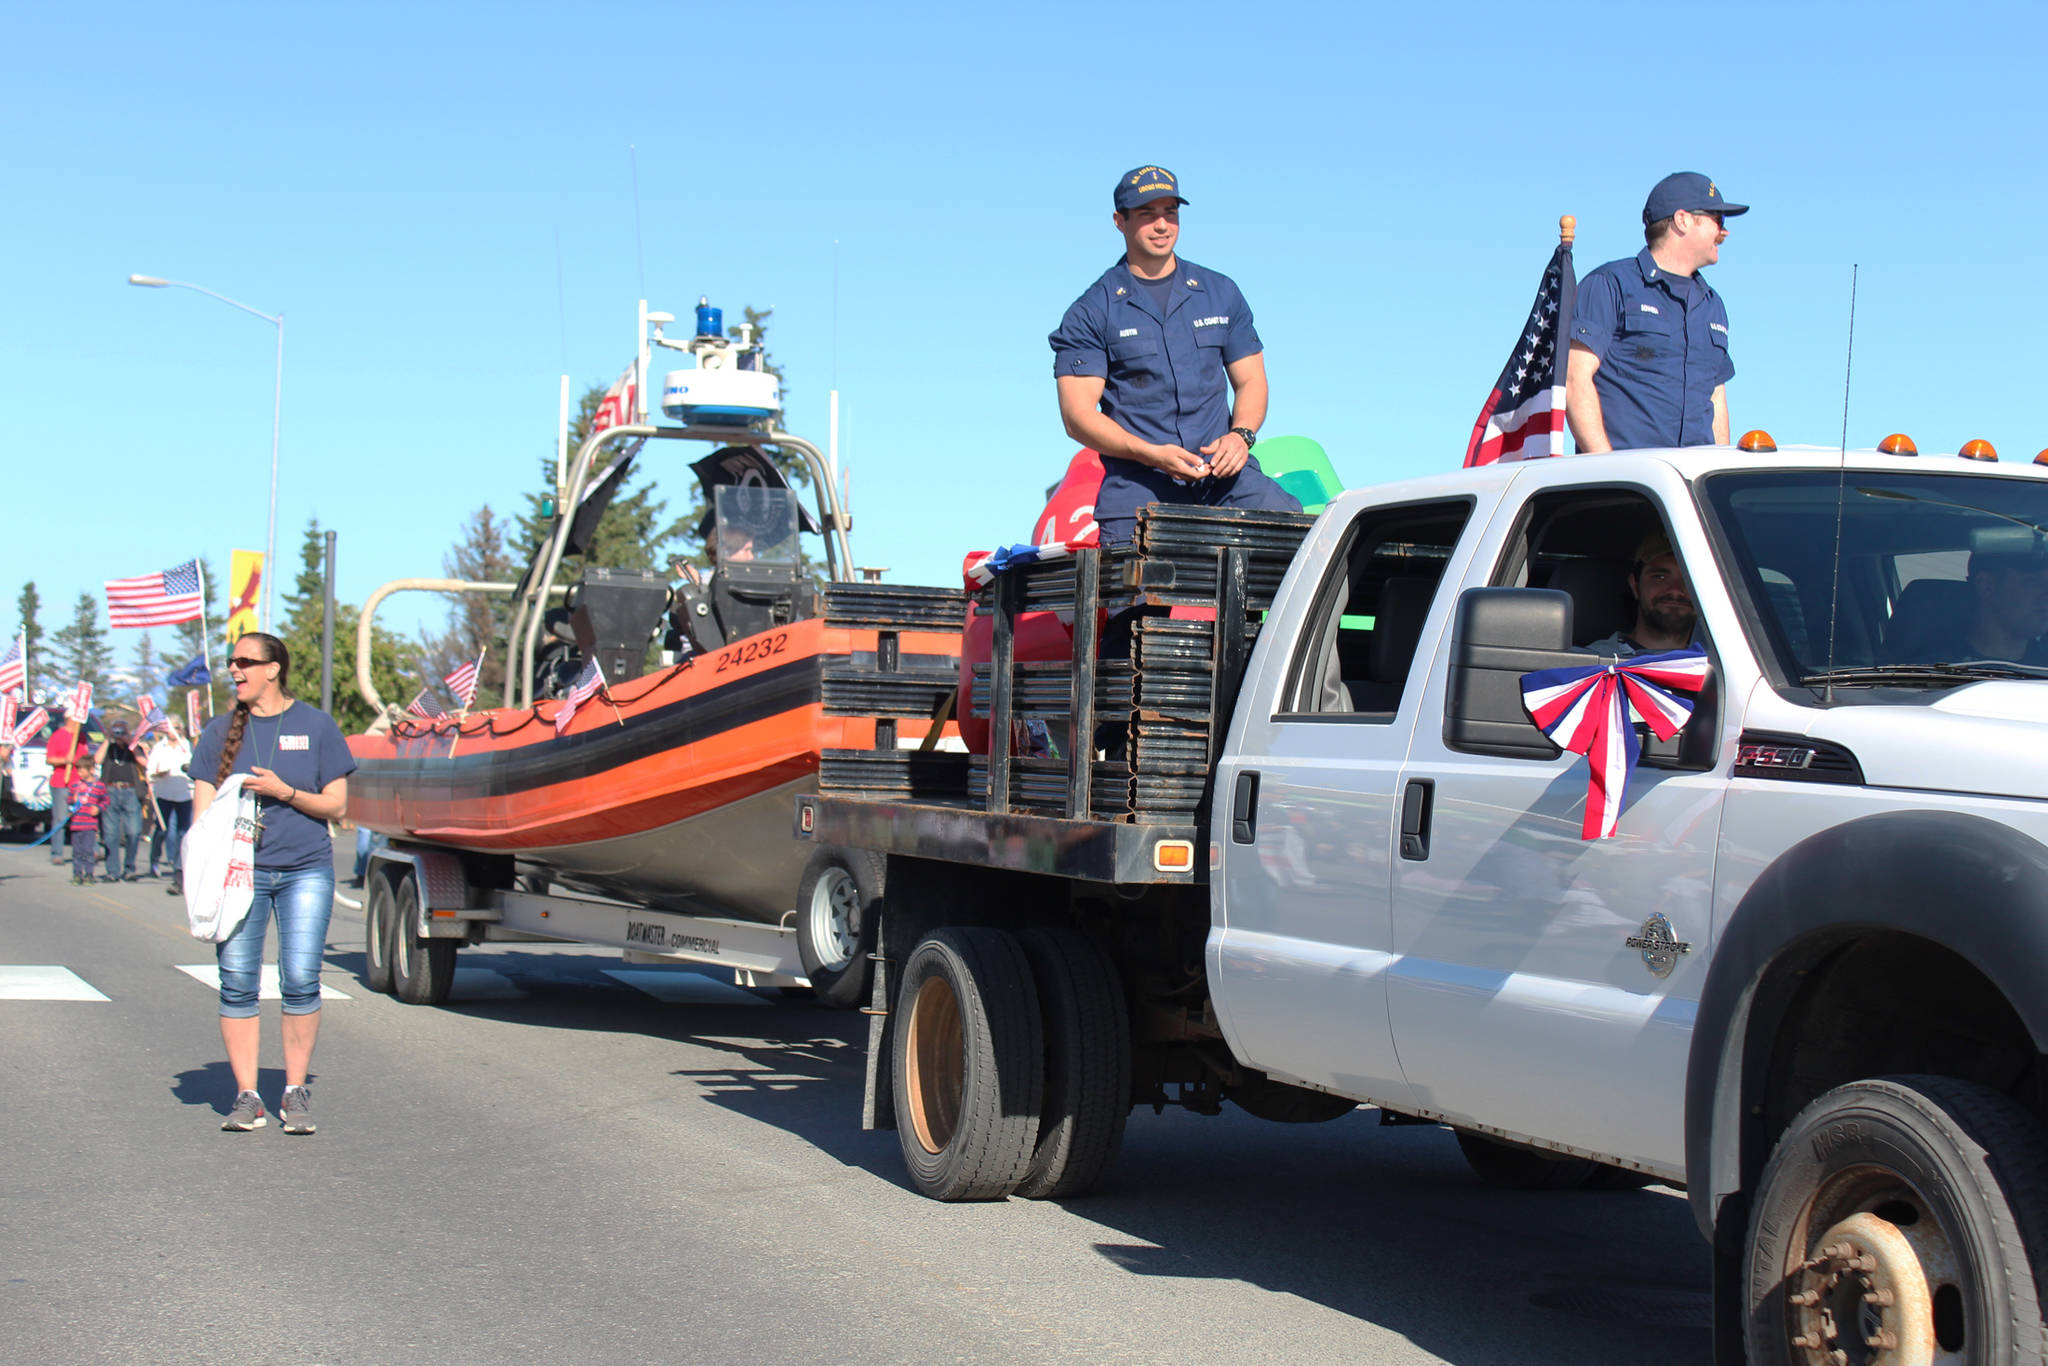 Members of the U.S. Coast Guard stationed in Homer proceed down Pioneer Avenue in their float during this year’s Independence Day parade Wednesday, July 4, 2018 in Homer, Alaska. The represented the U.S. Coast Guard Cutter Hickory, also known as “Bull of the North.” (Photo by Megan Pacer/Homer News)